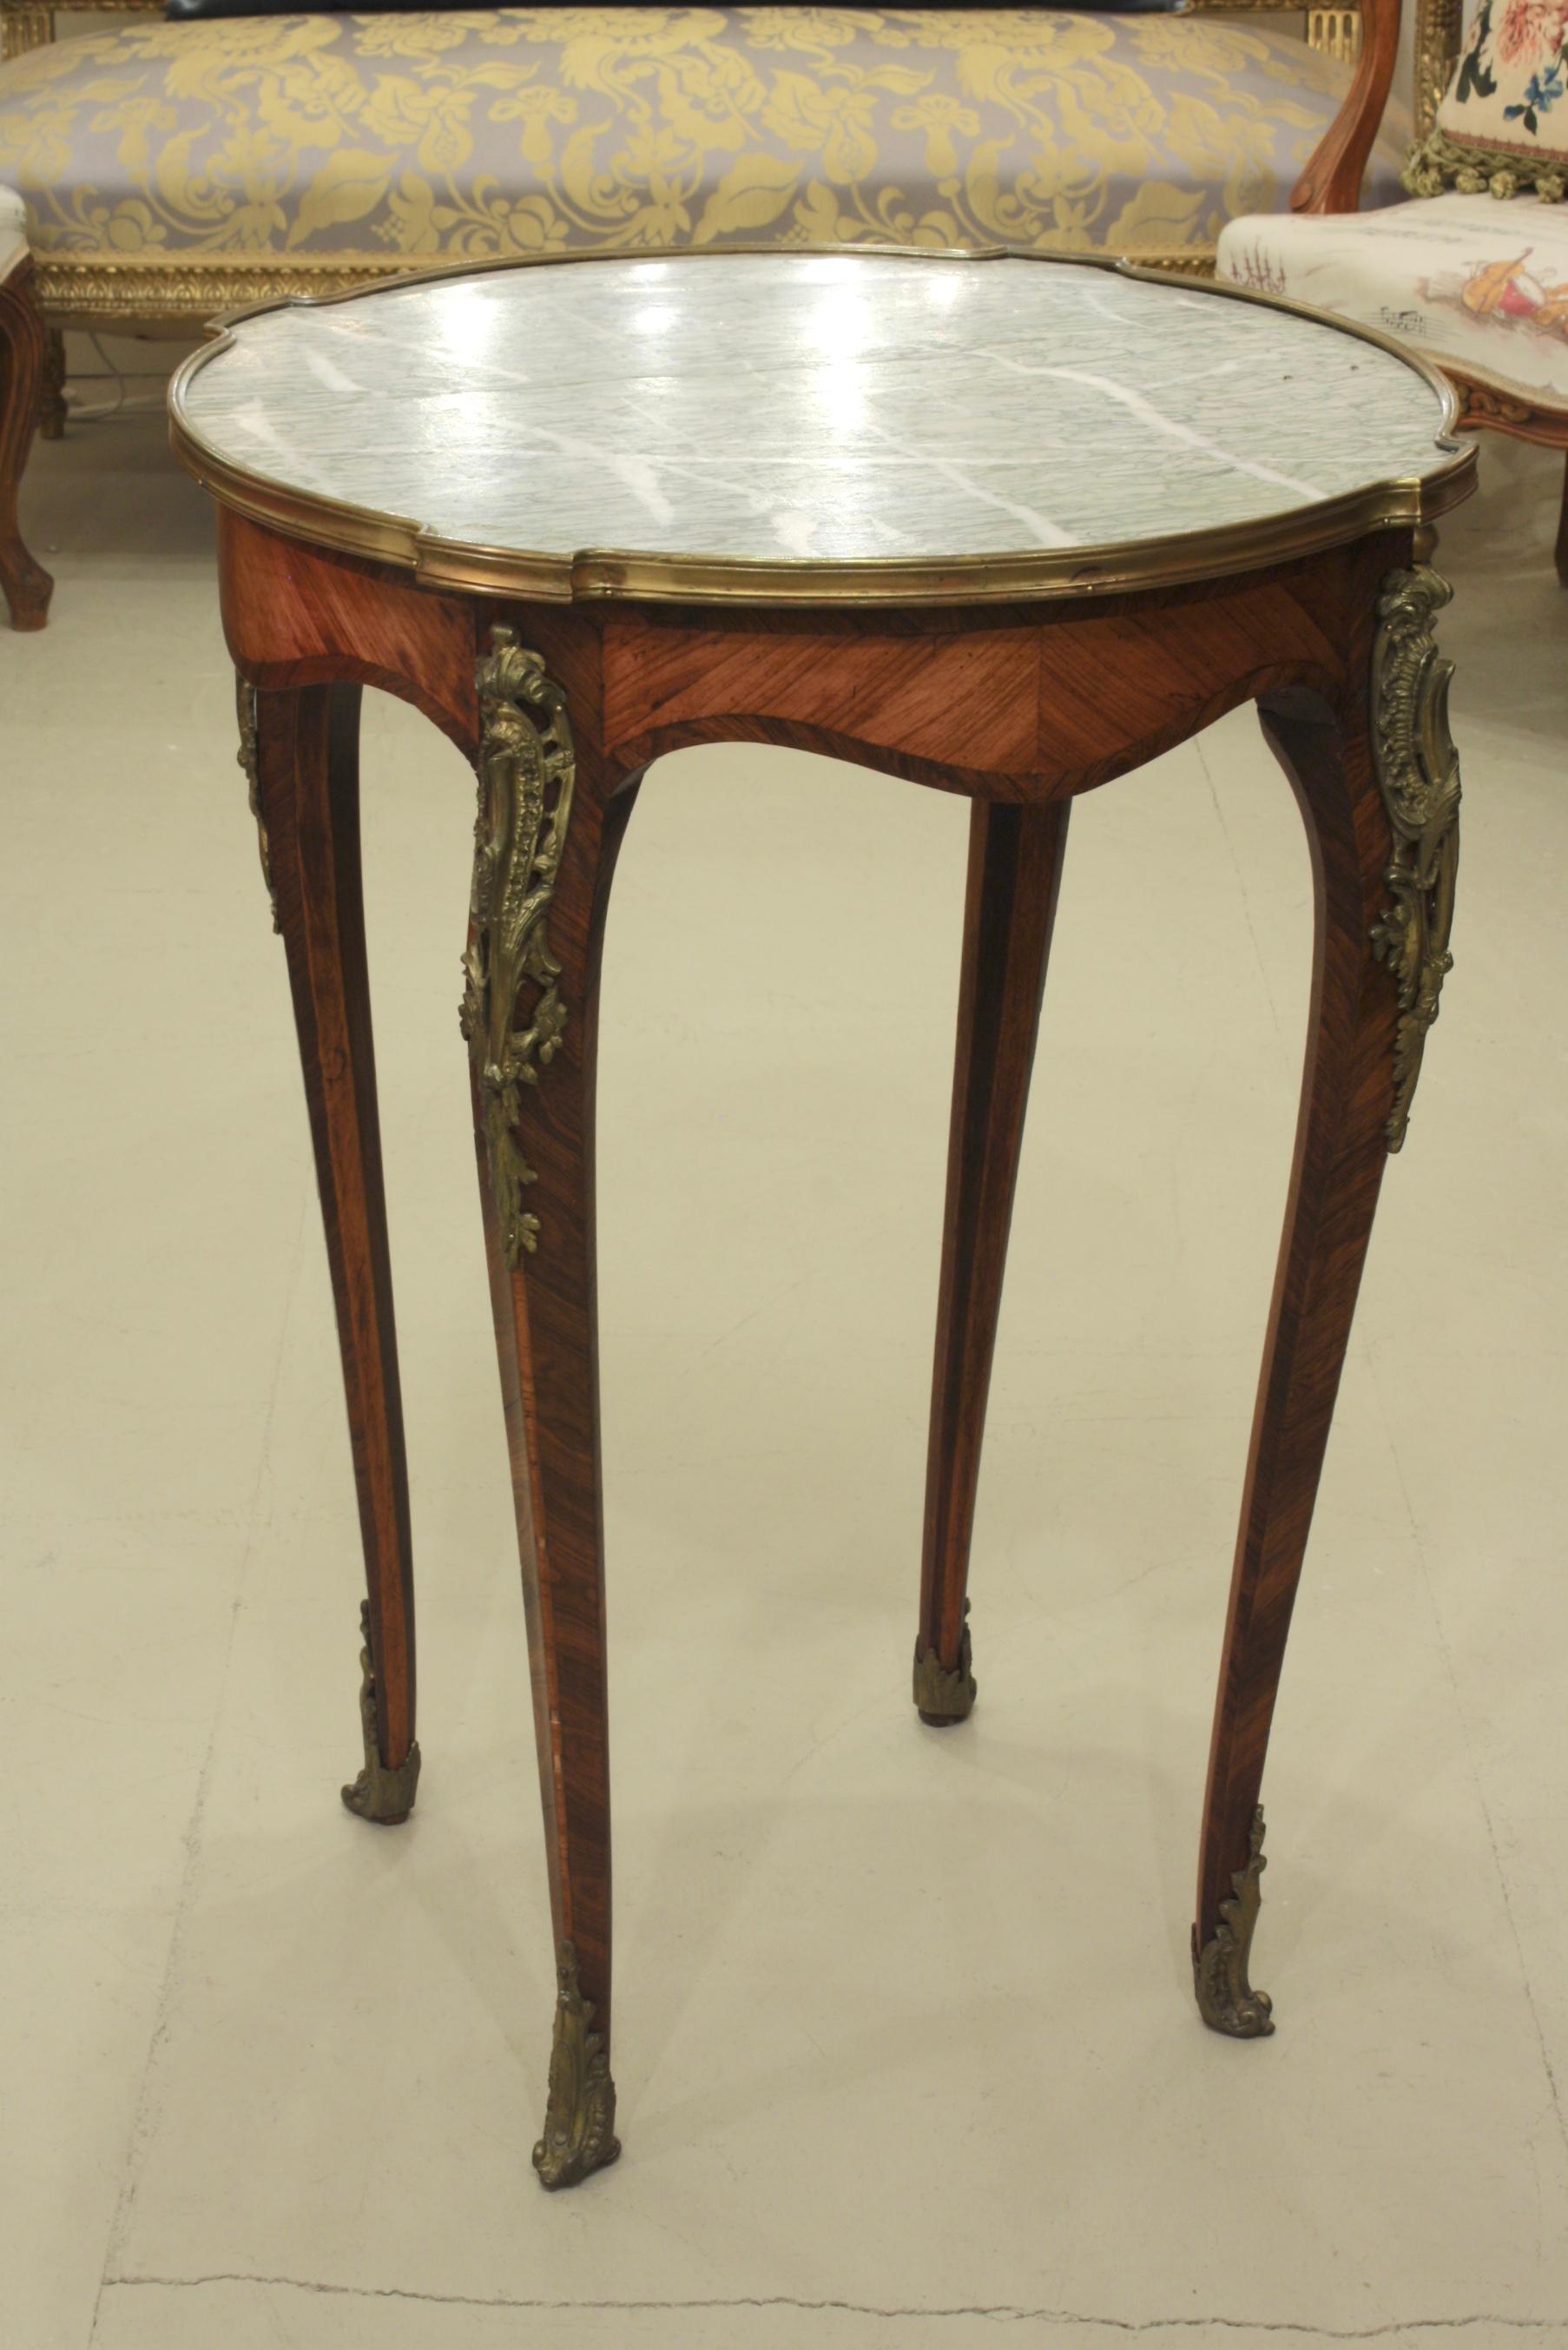 French Louis XV style gueridon or center table with nicely veined green marble top and gilt bronze mounts. The parquetry on the frieze and legs is bois de rose and bois Violette. The marble has a small crack along a vein that is not very noticeable.